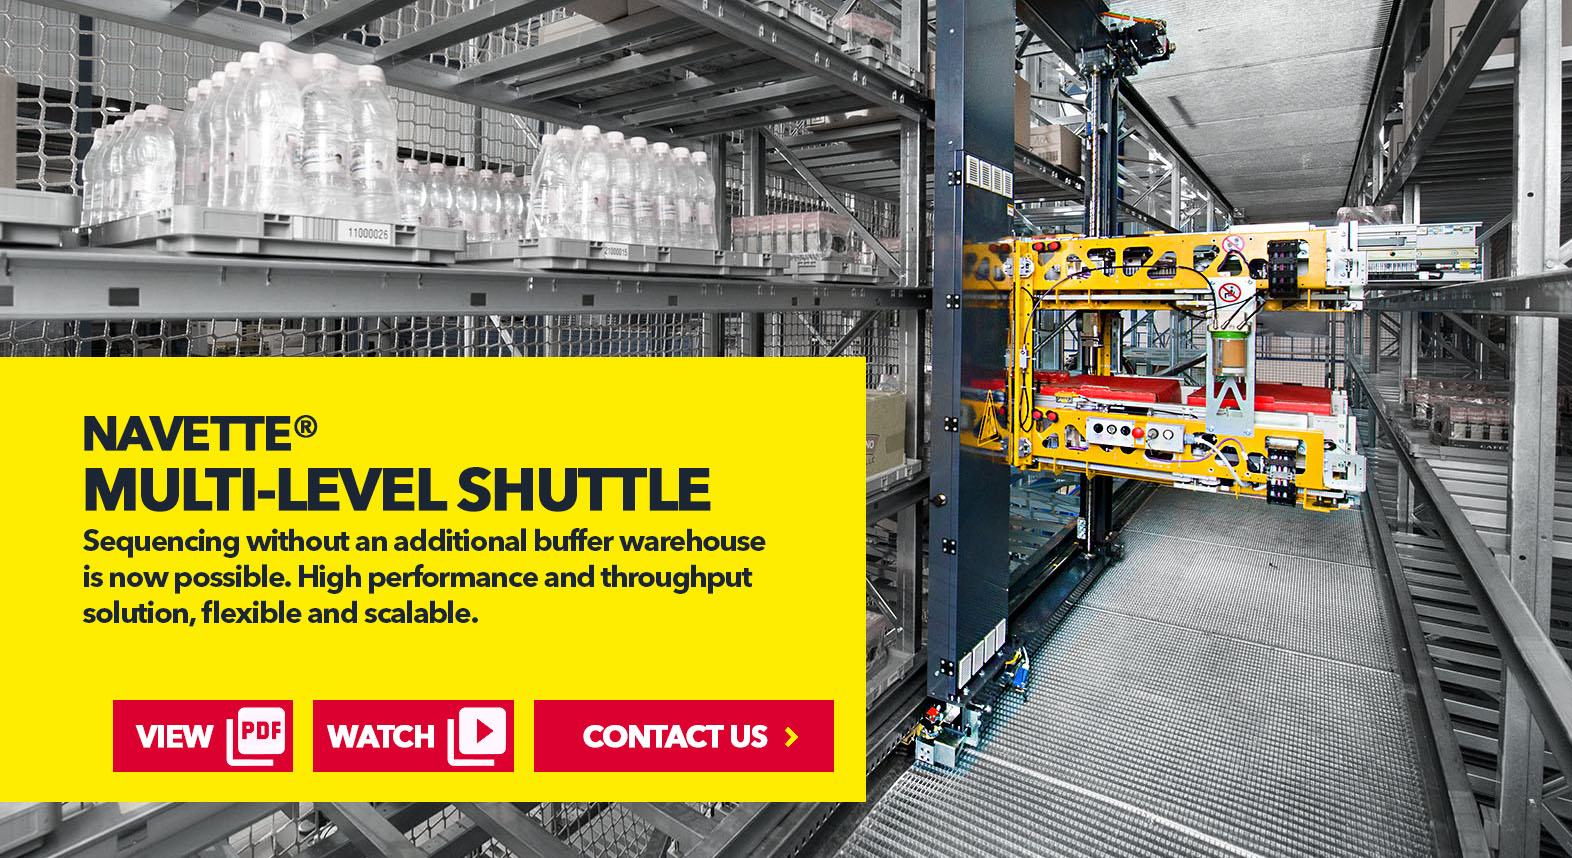 Navette Multi-Level Shuttle Systems by SSI Schaefer USA Download Guide, Watch Video, Contact Us. www.chaefershelving.com